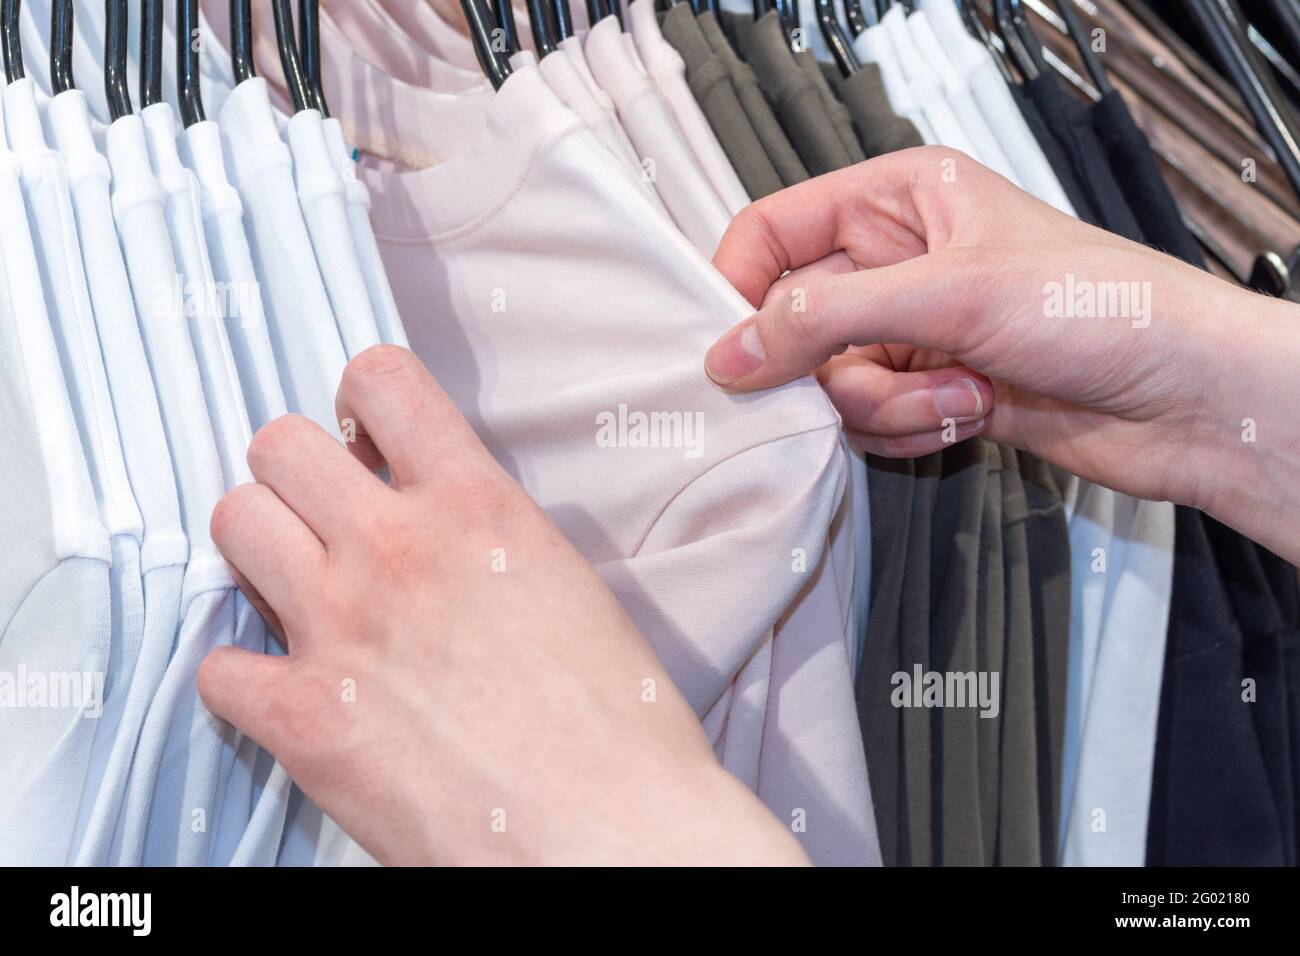 Shopping, fashion, style - Women's hands are choosing clothes hanging on a hanger in the store. Business concept. Stock Photo